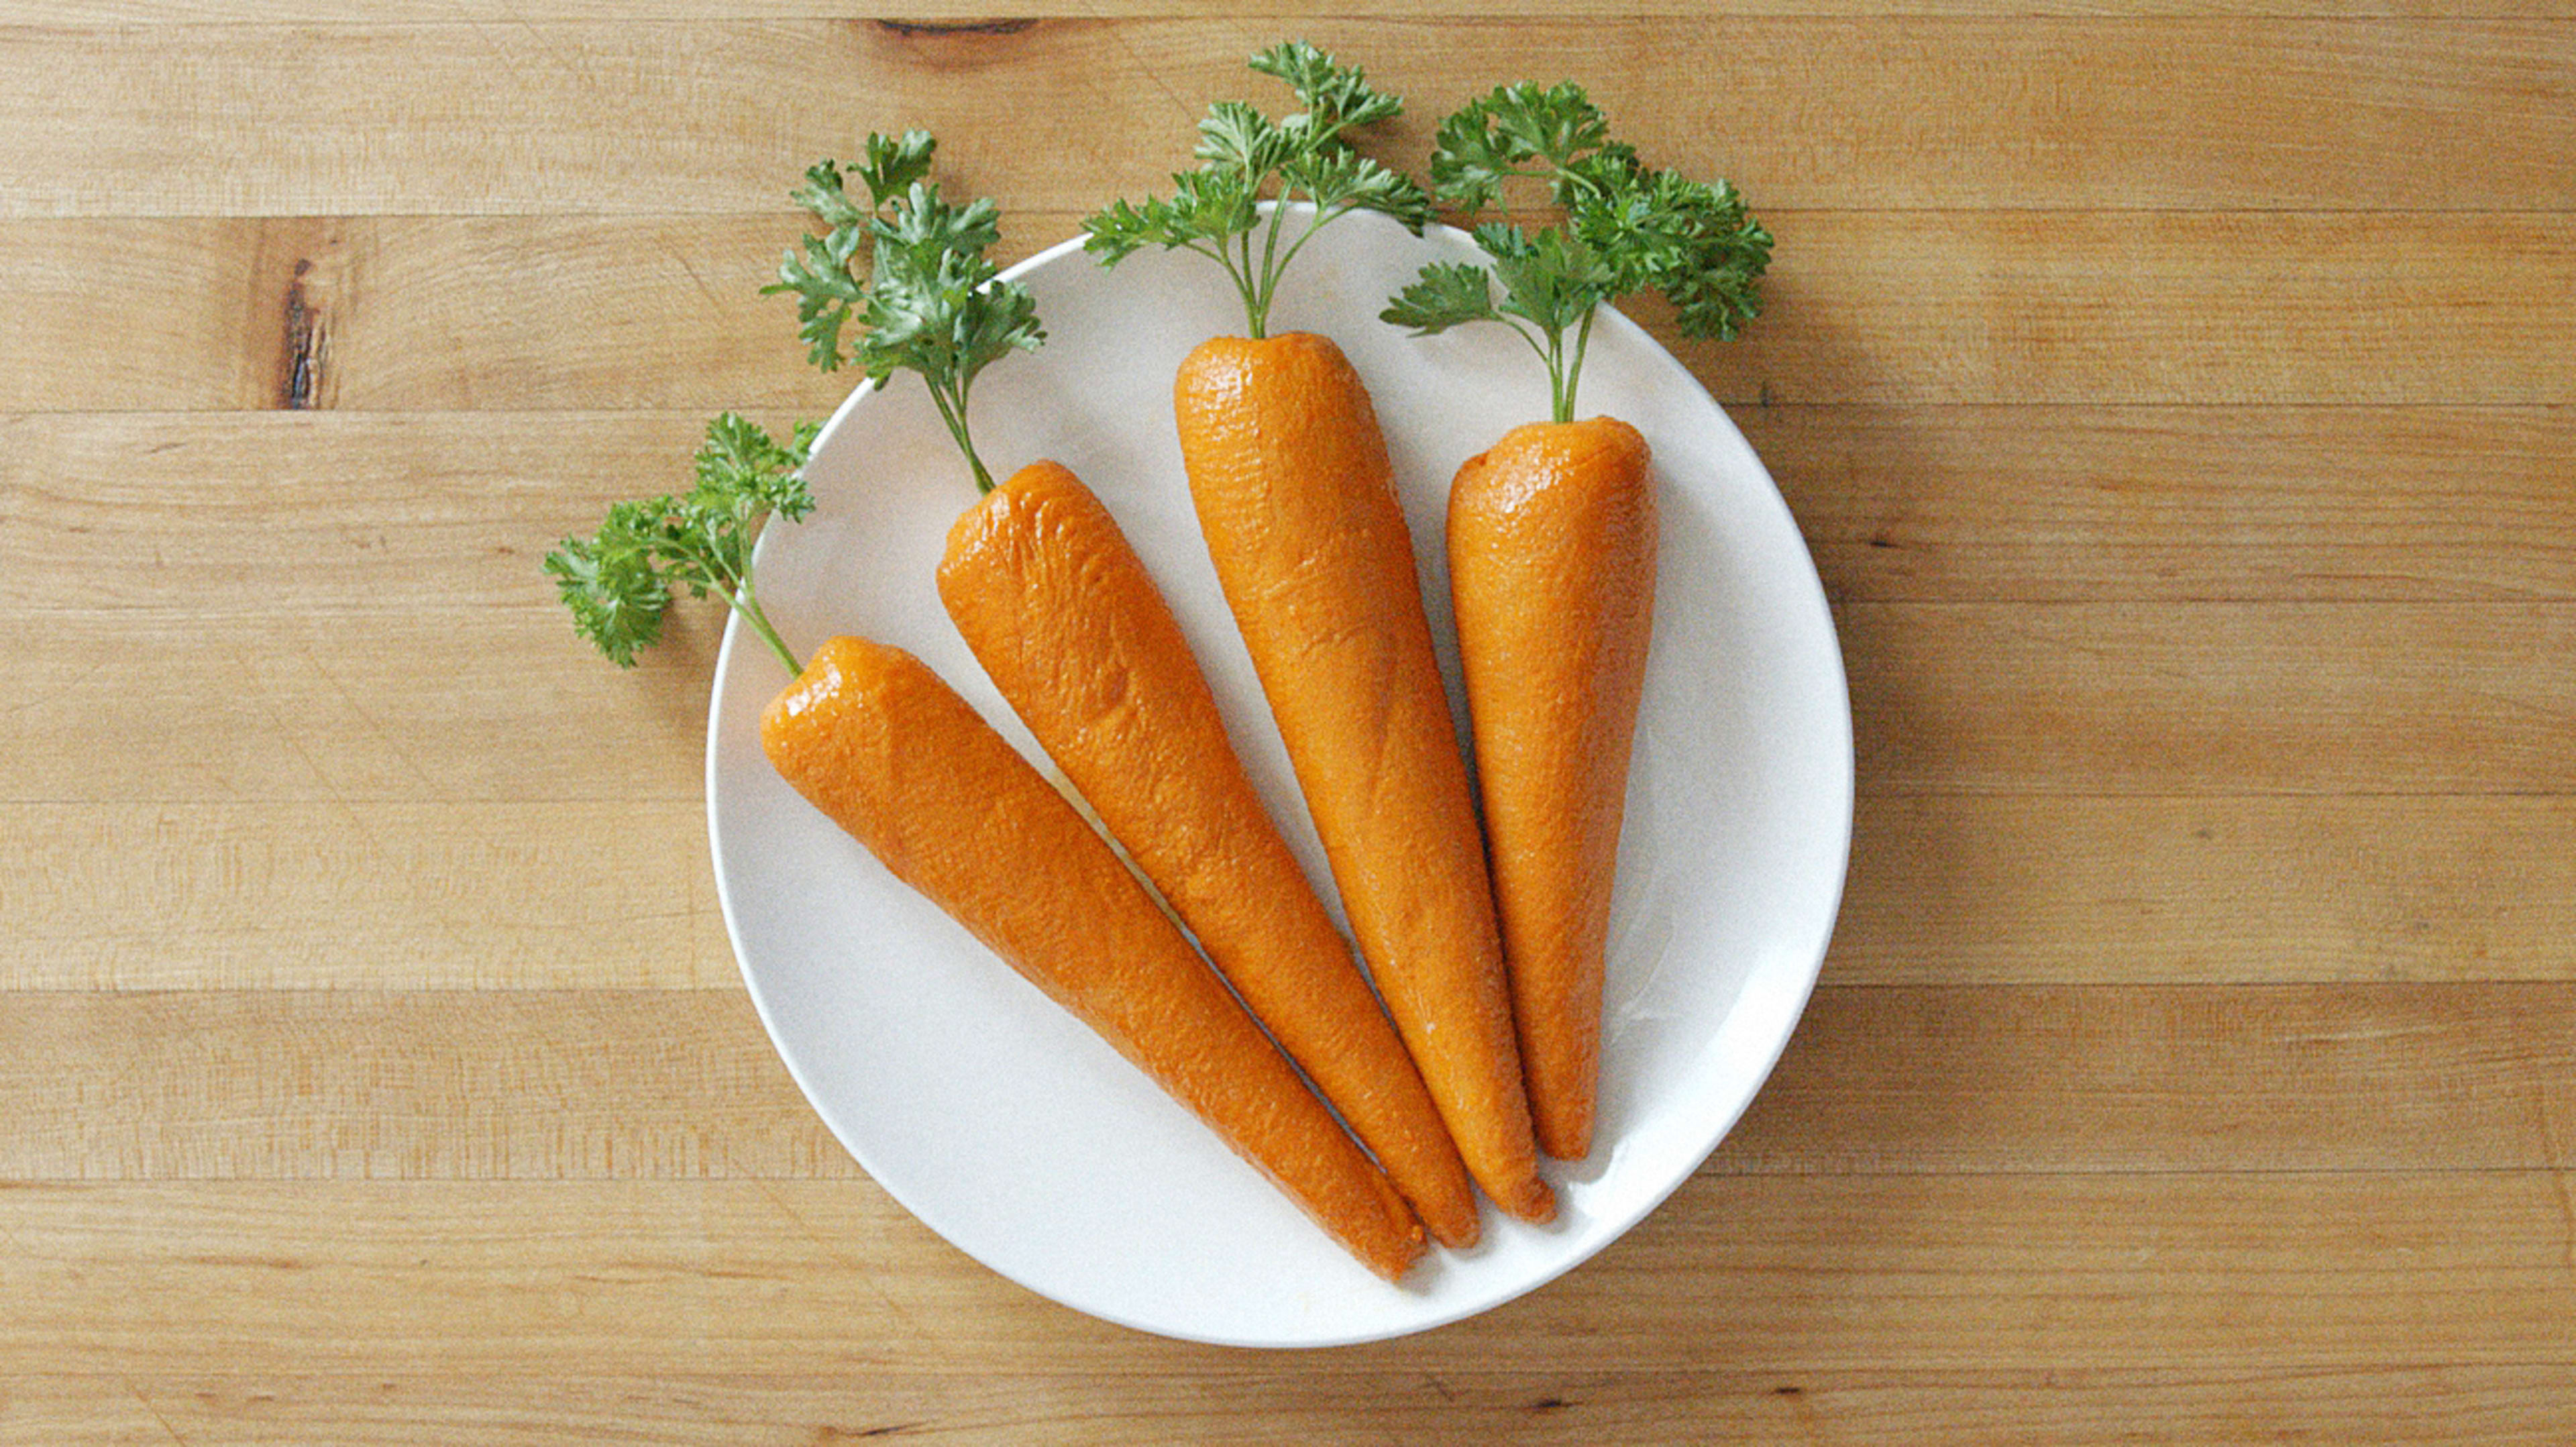 Arby’s is making carrots out of meat. Yes, meat